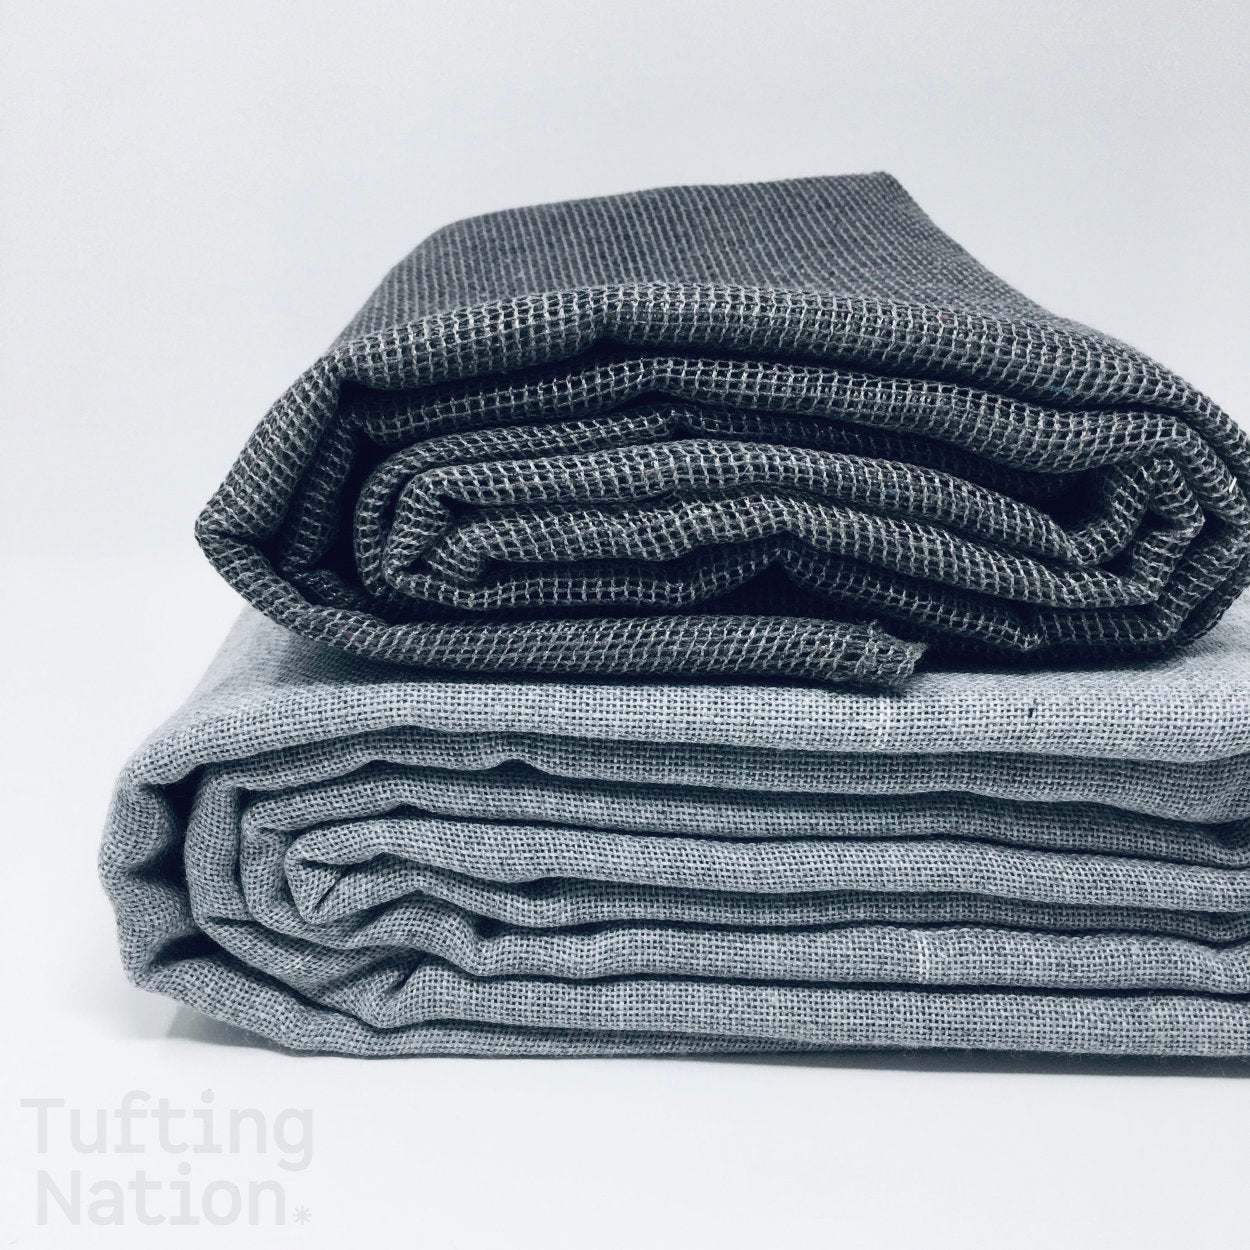 Gray Professional Tufting Cloth and Rug Backing for Rug Tufting | TuftingNation